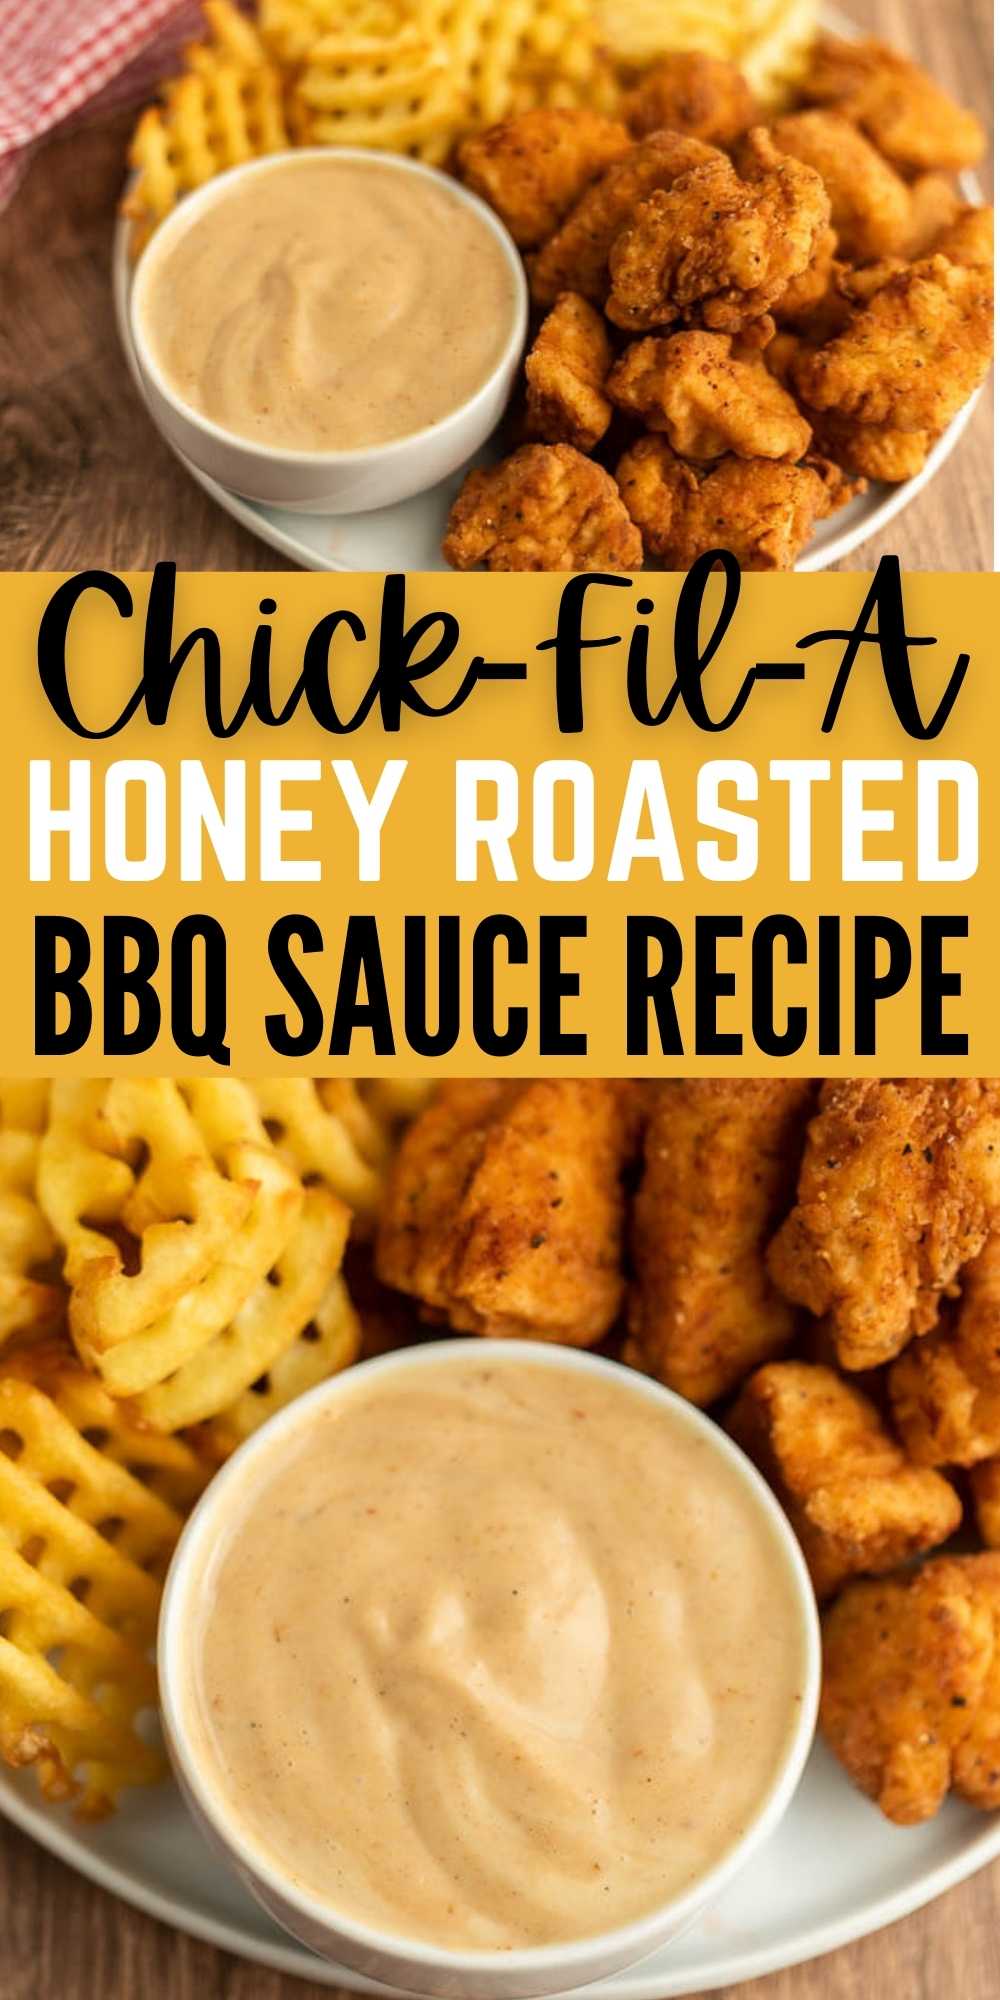 It only takes 4 ingredients to make this Chick-Fil-A Honey Roasted BBQ Sauce Recipe. It is easy to make and now you can make it at home. You will love this simple copycat Honey Roasted BBQ Sauce Chick-Fil-A recipe. #eatingonadime #copycatrecipes #chickfilarecipes #saucerecipes #honeyroastedBBQsauce 
